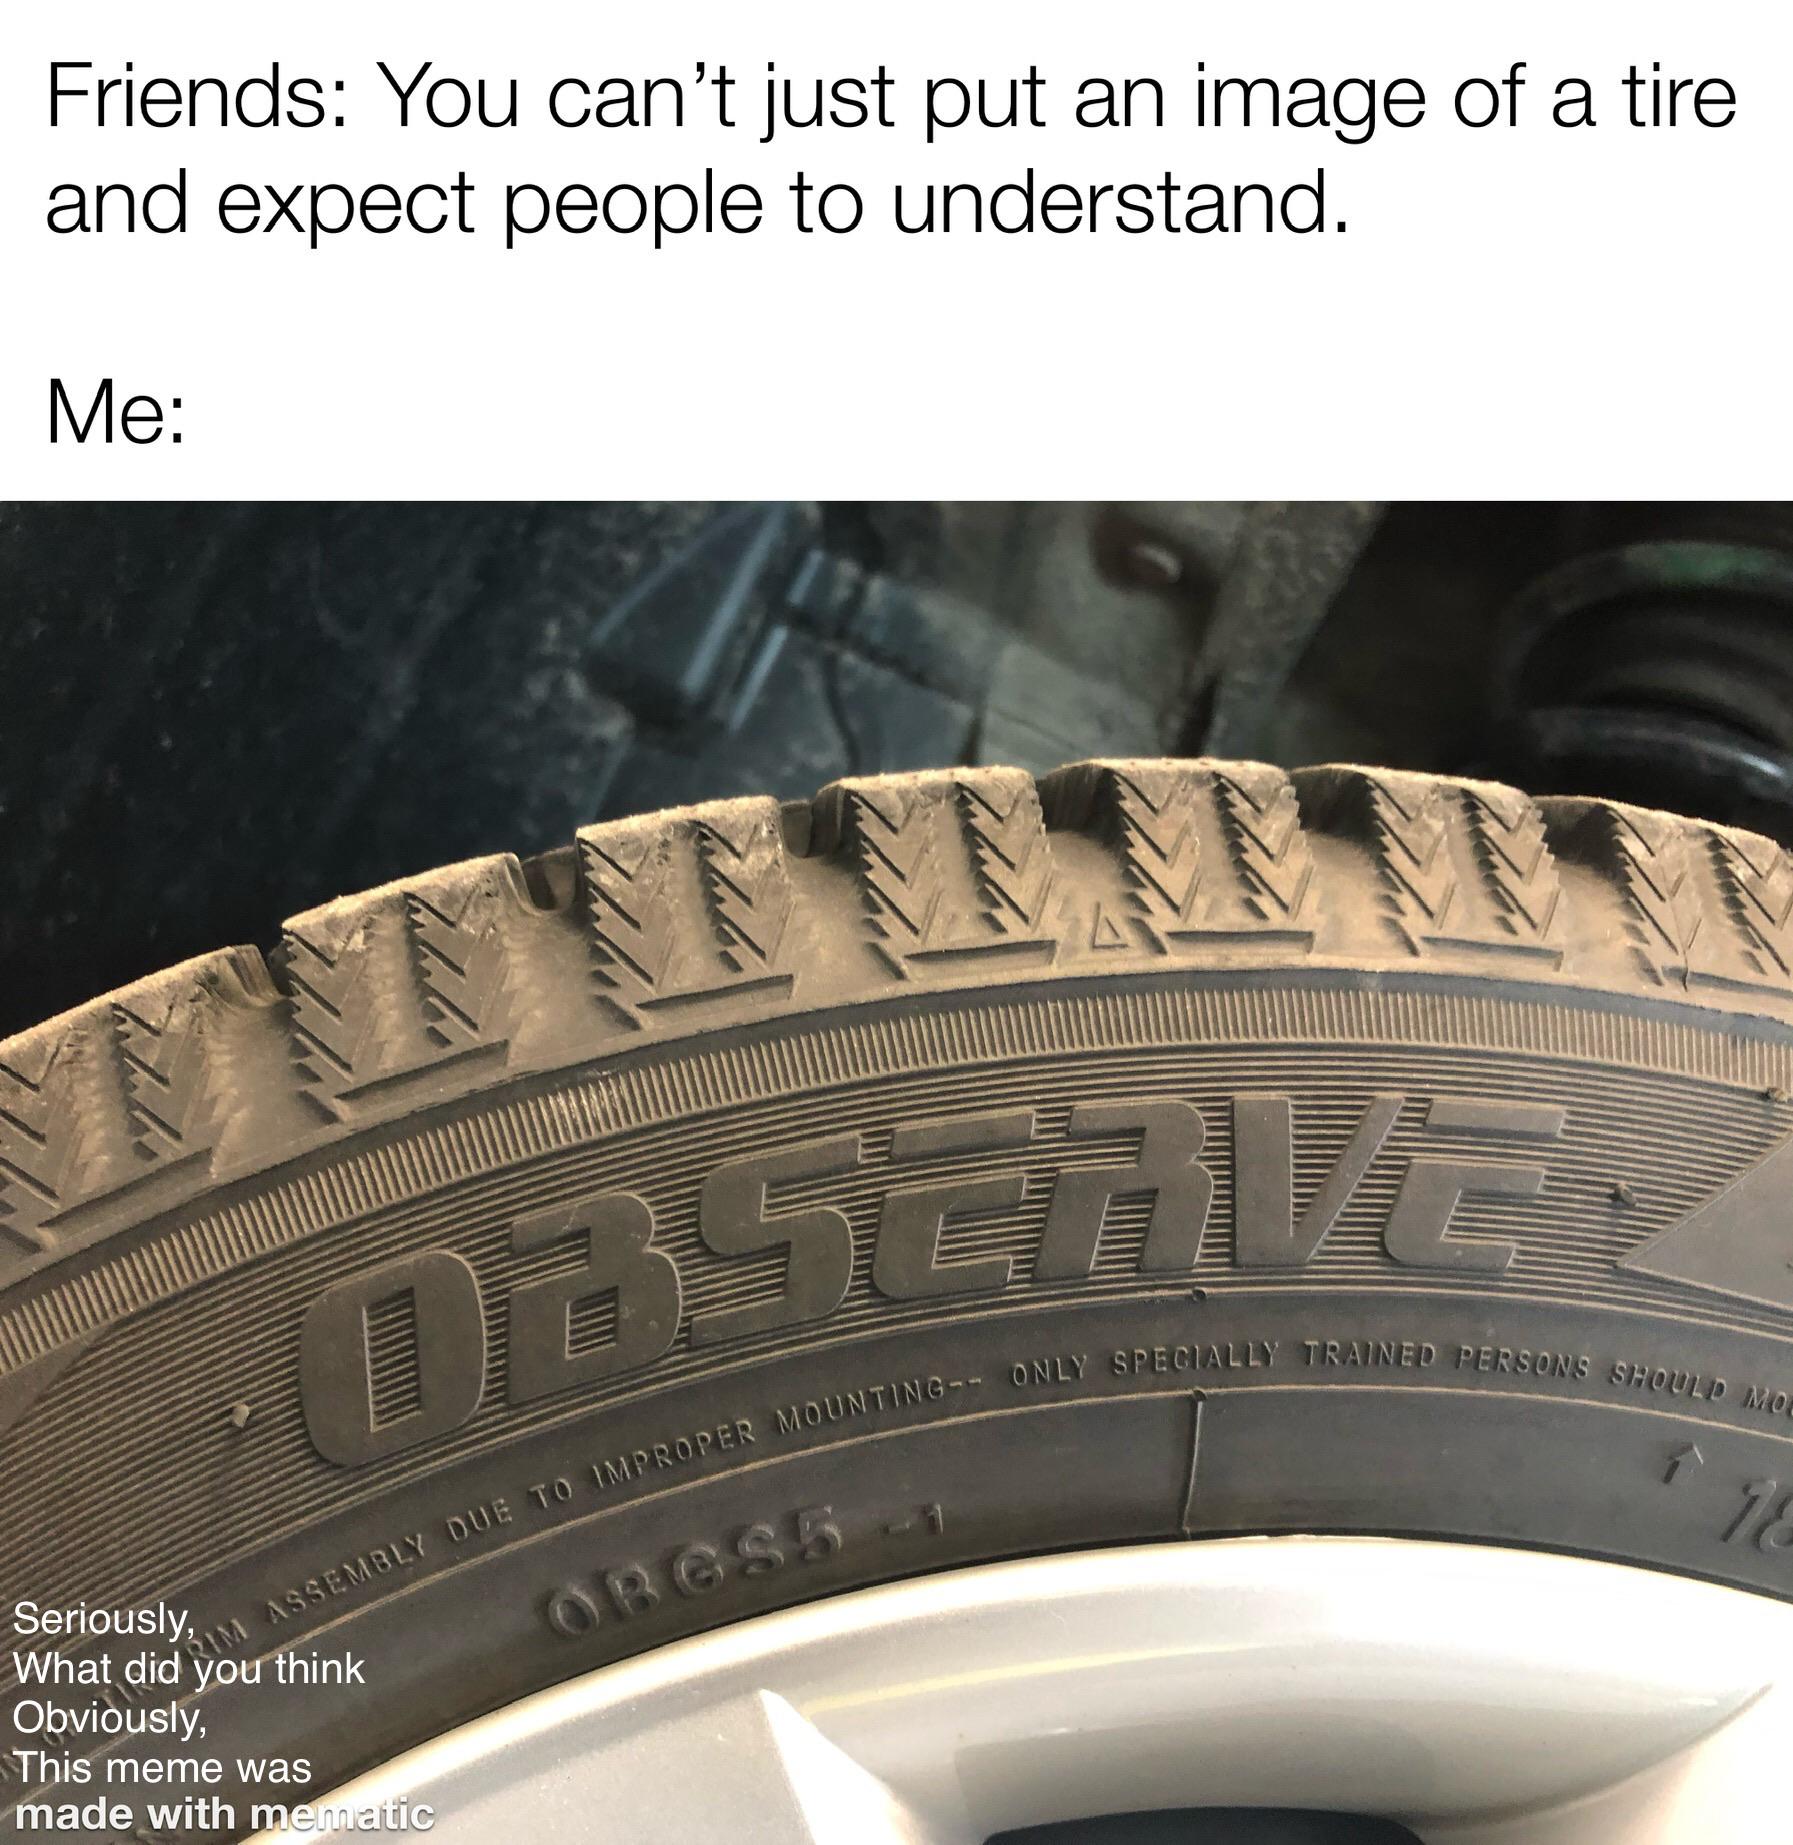 Funny, Toyo, Rubber, WHEEL, TIREd, Robert other memes Funny, Toyo, Rubber, WHEEL, TIREd, Robert text: Friends: You can't just put an image of a tire and expect people to understand. Seriously What did hink OPvibusly, TbiSmeme was made with 